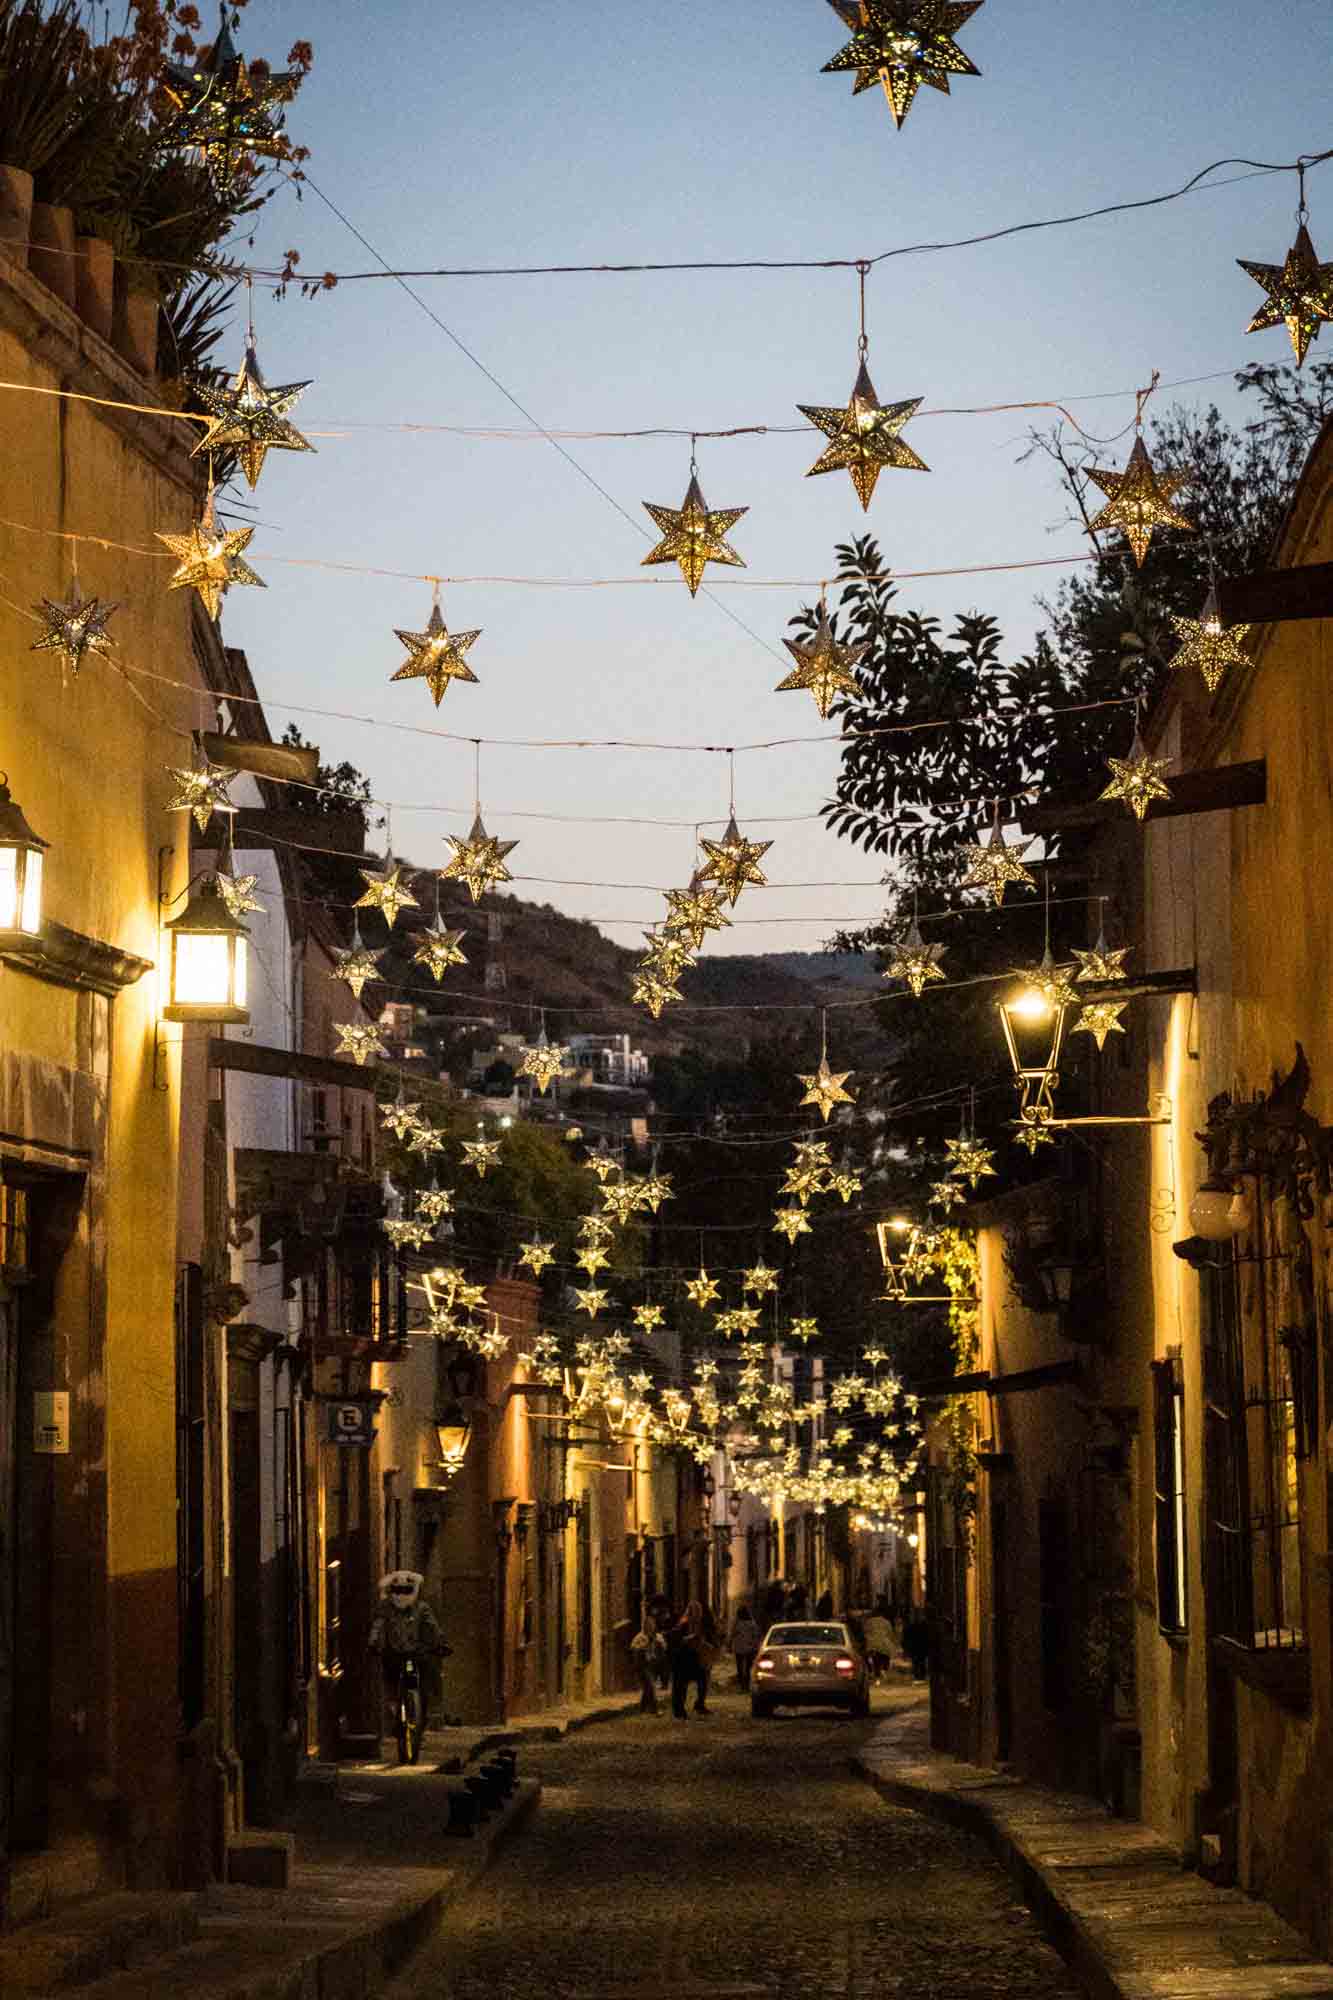 Star-shaped lights at night on the streets of San Miguel de Allende